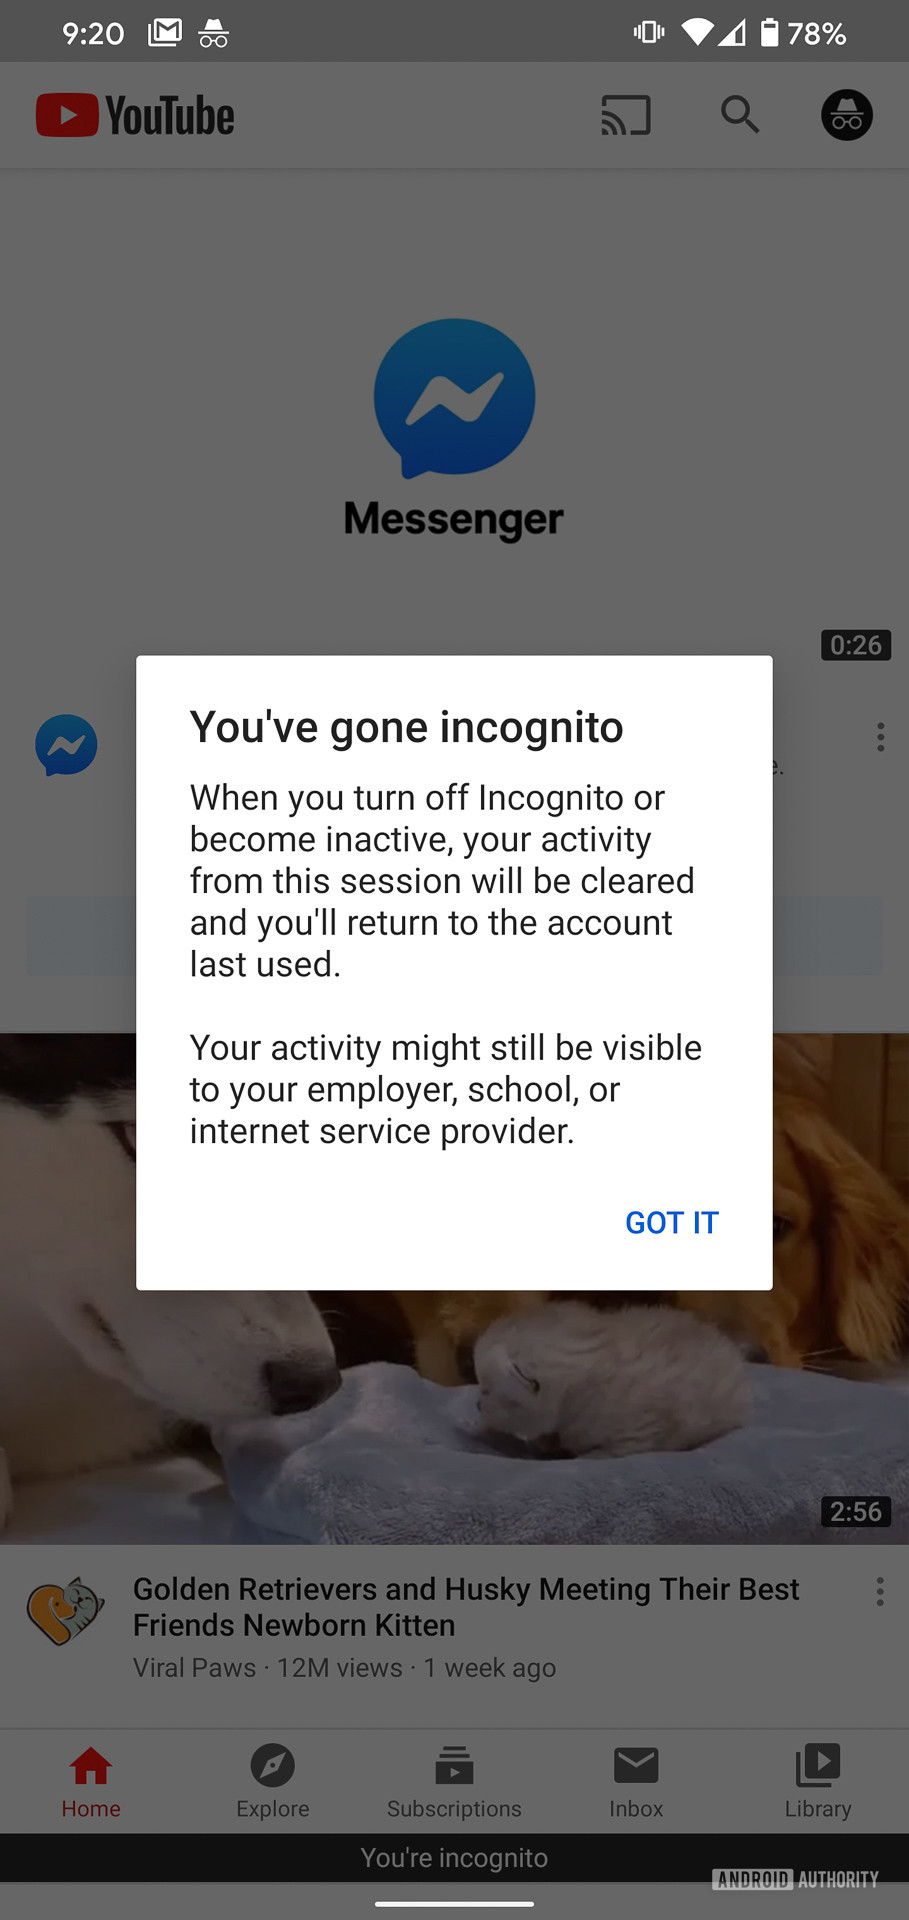 Google YouTube Incognito landing page